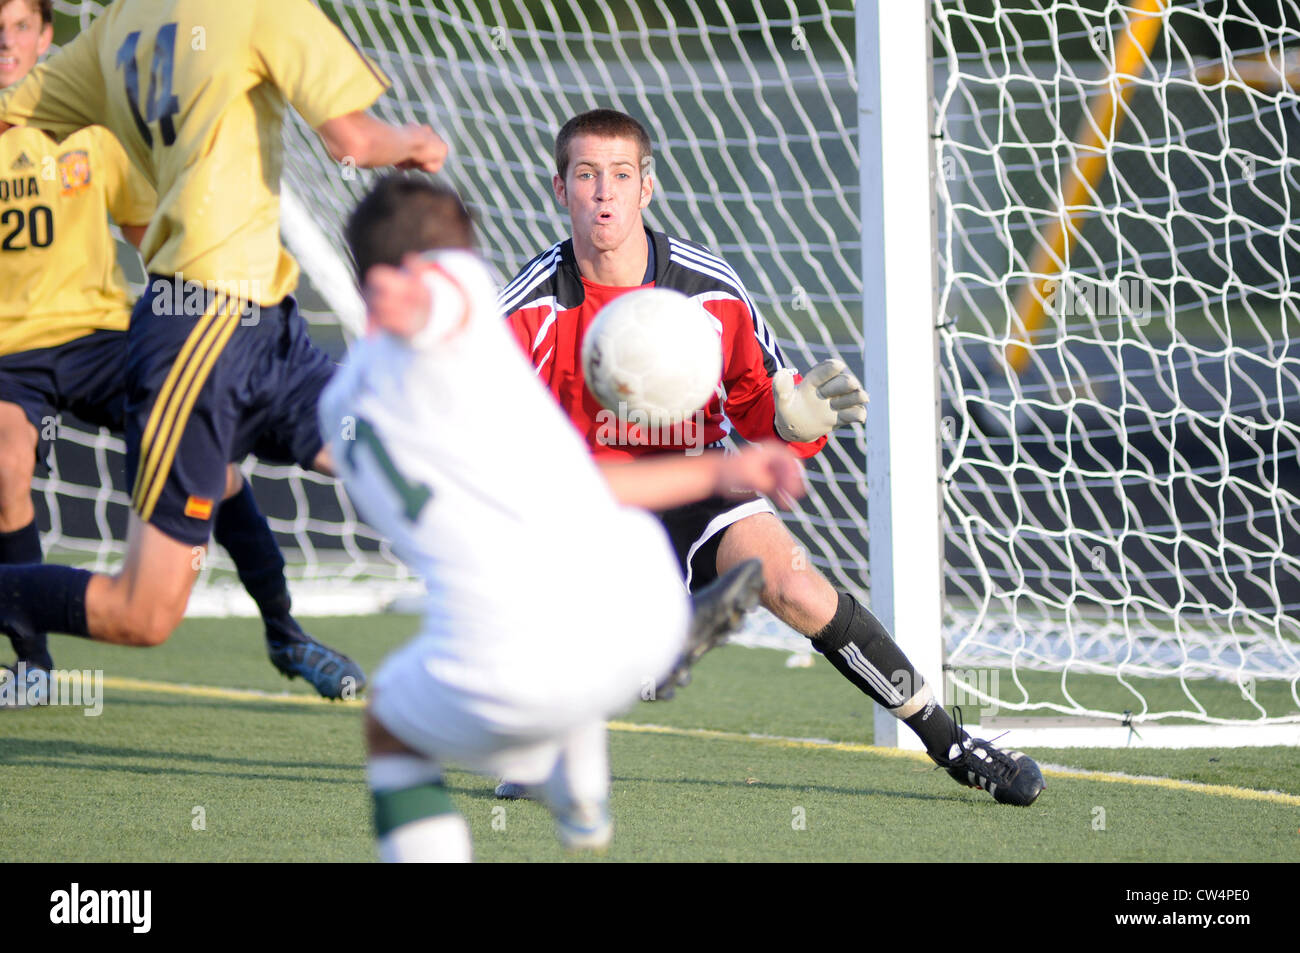 Soccer keeper highly focused on a shot from close range during a high school match. USA. Stock Photo